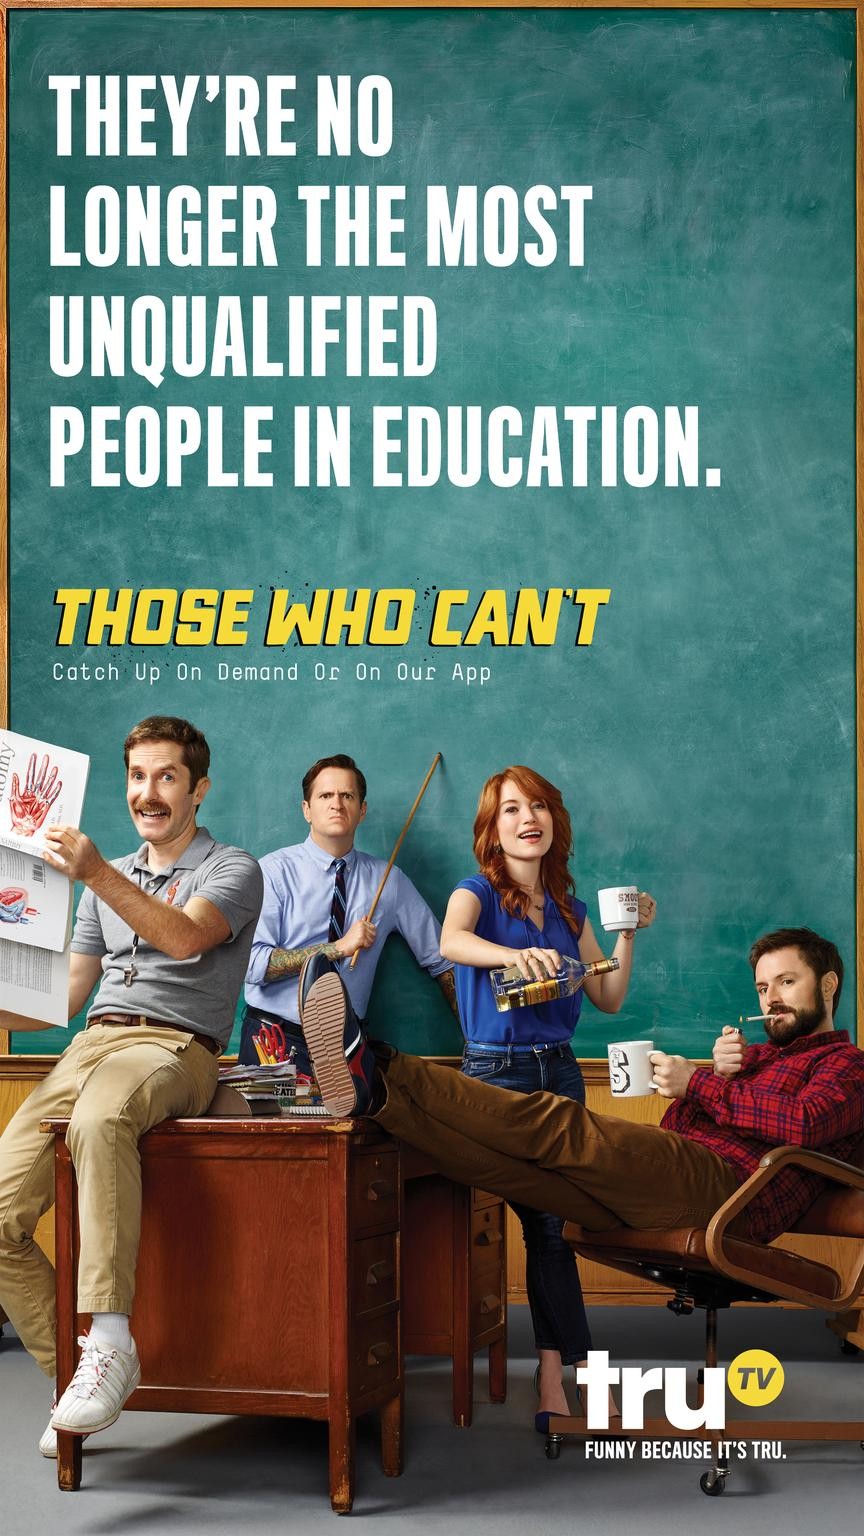 EDUCATORS WHO CAN'T